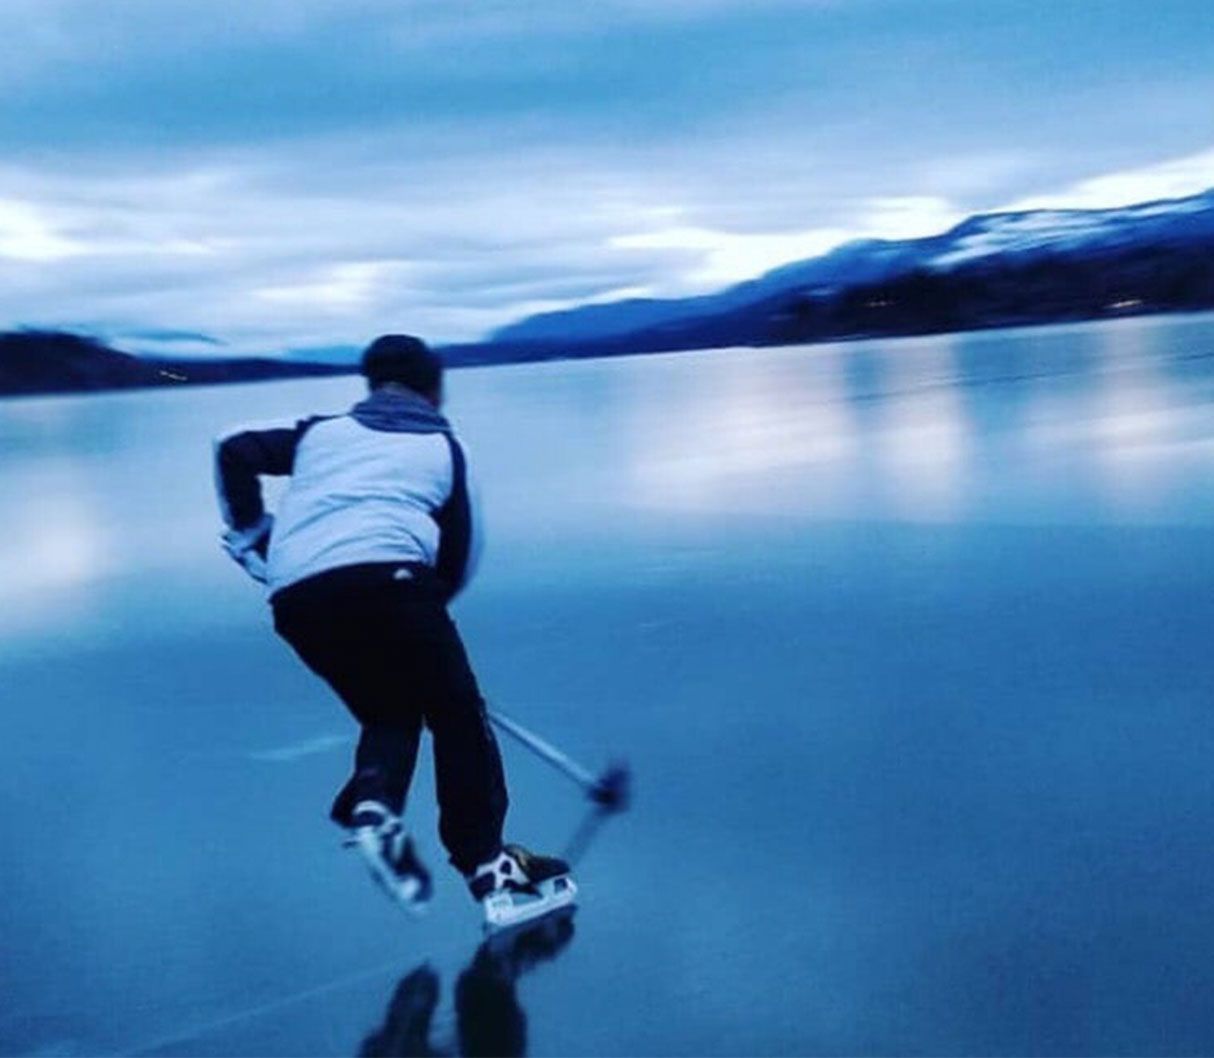 Skating across Lake Windermere Whiteway (photo by @gqthomas)